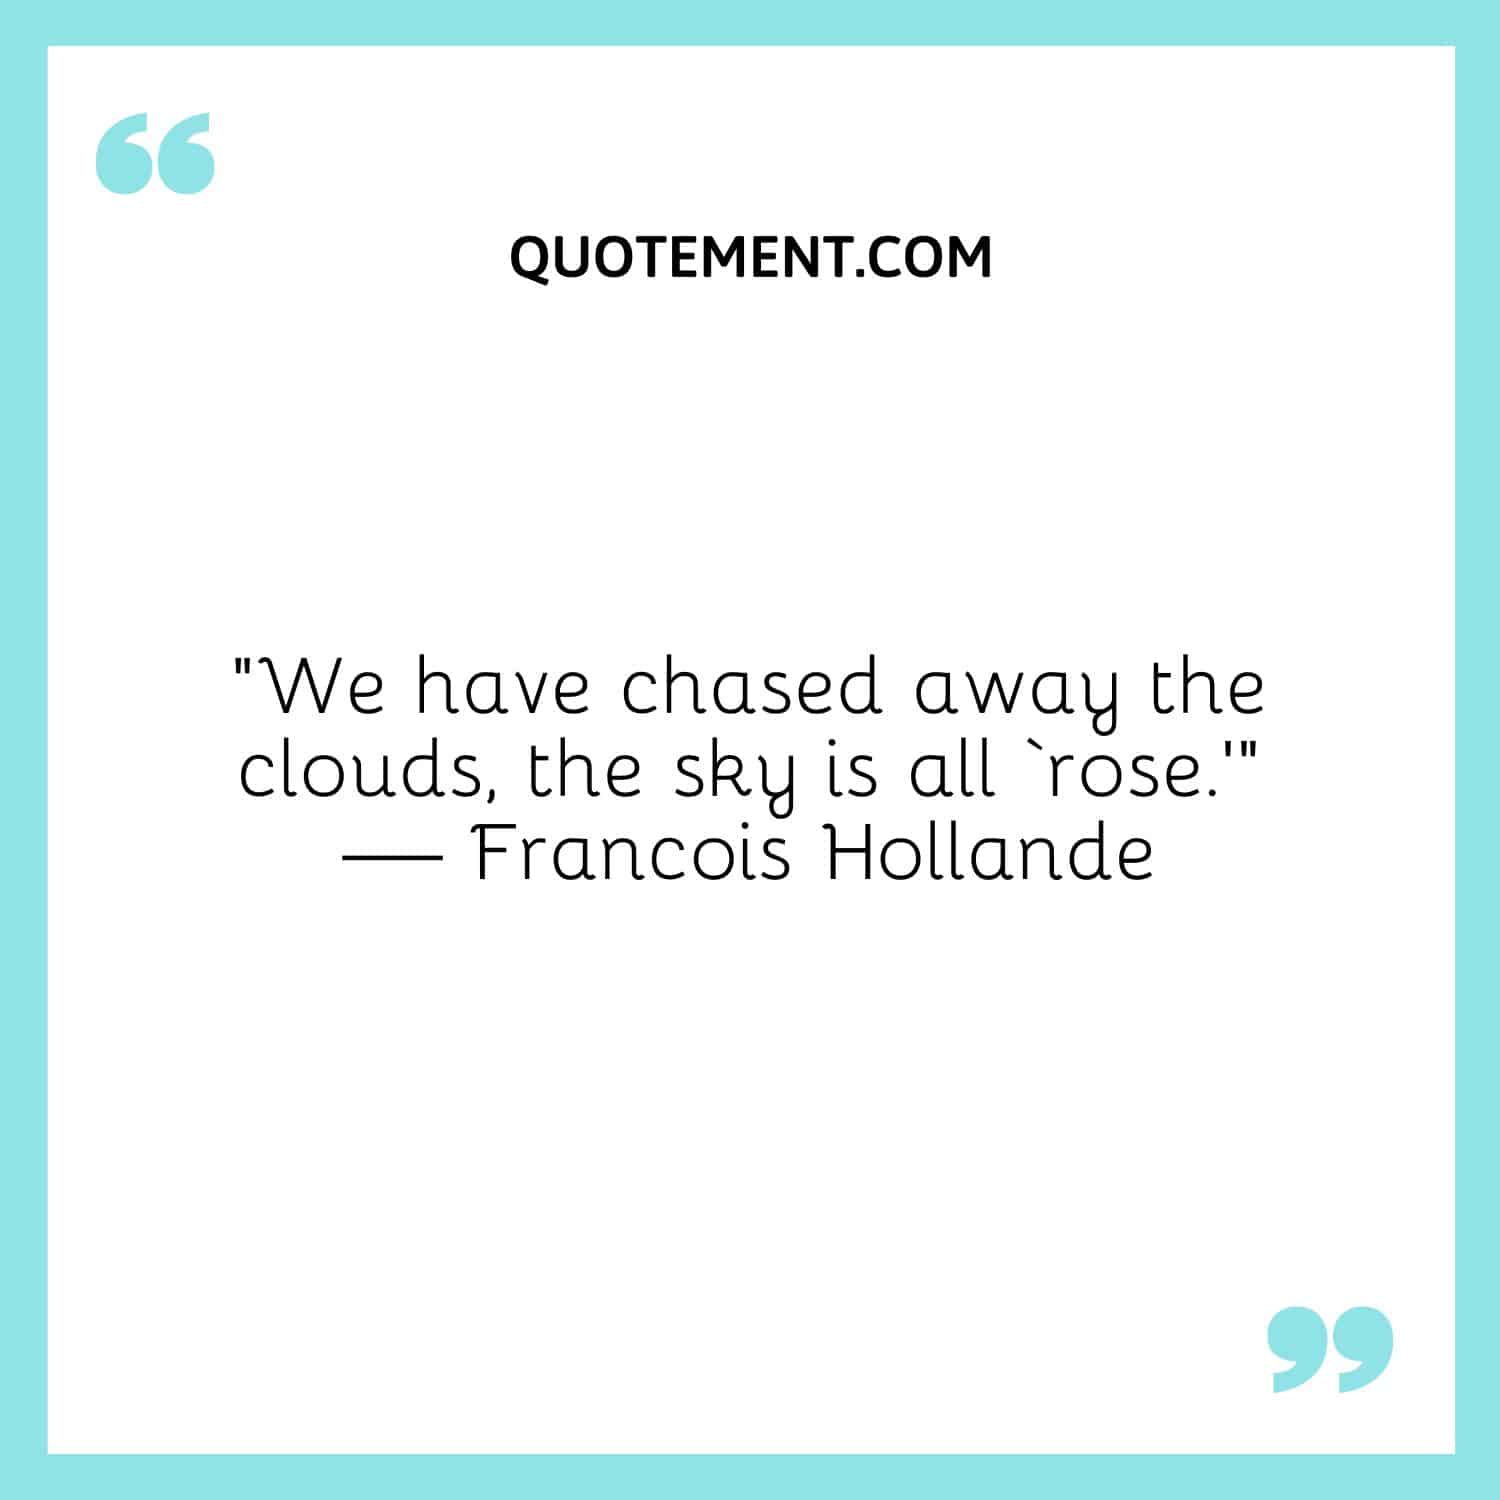 “We have chased away the clouds, the sky is all ‘rose.’” — Francois Hollande